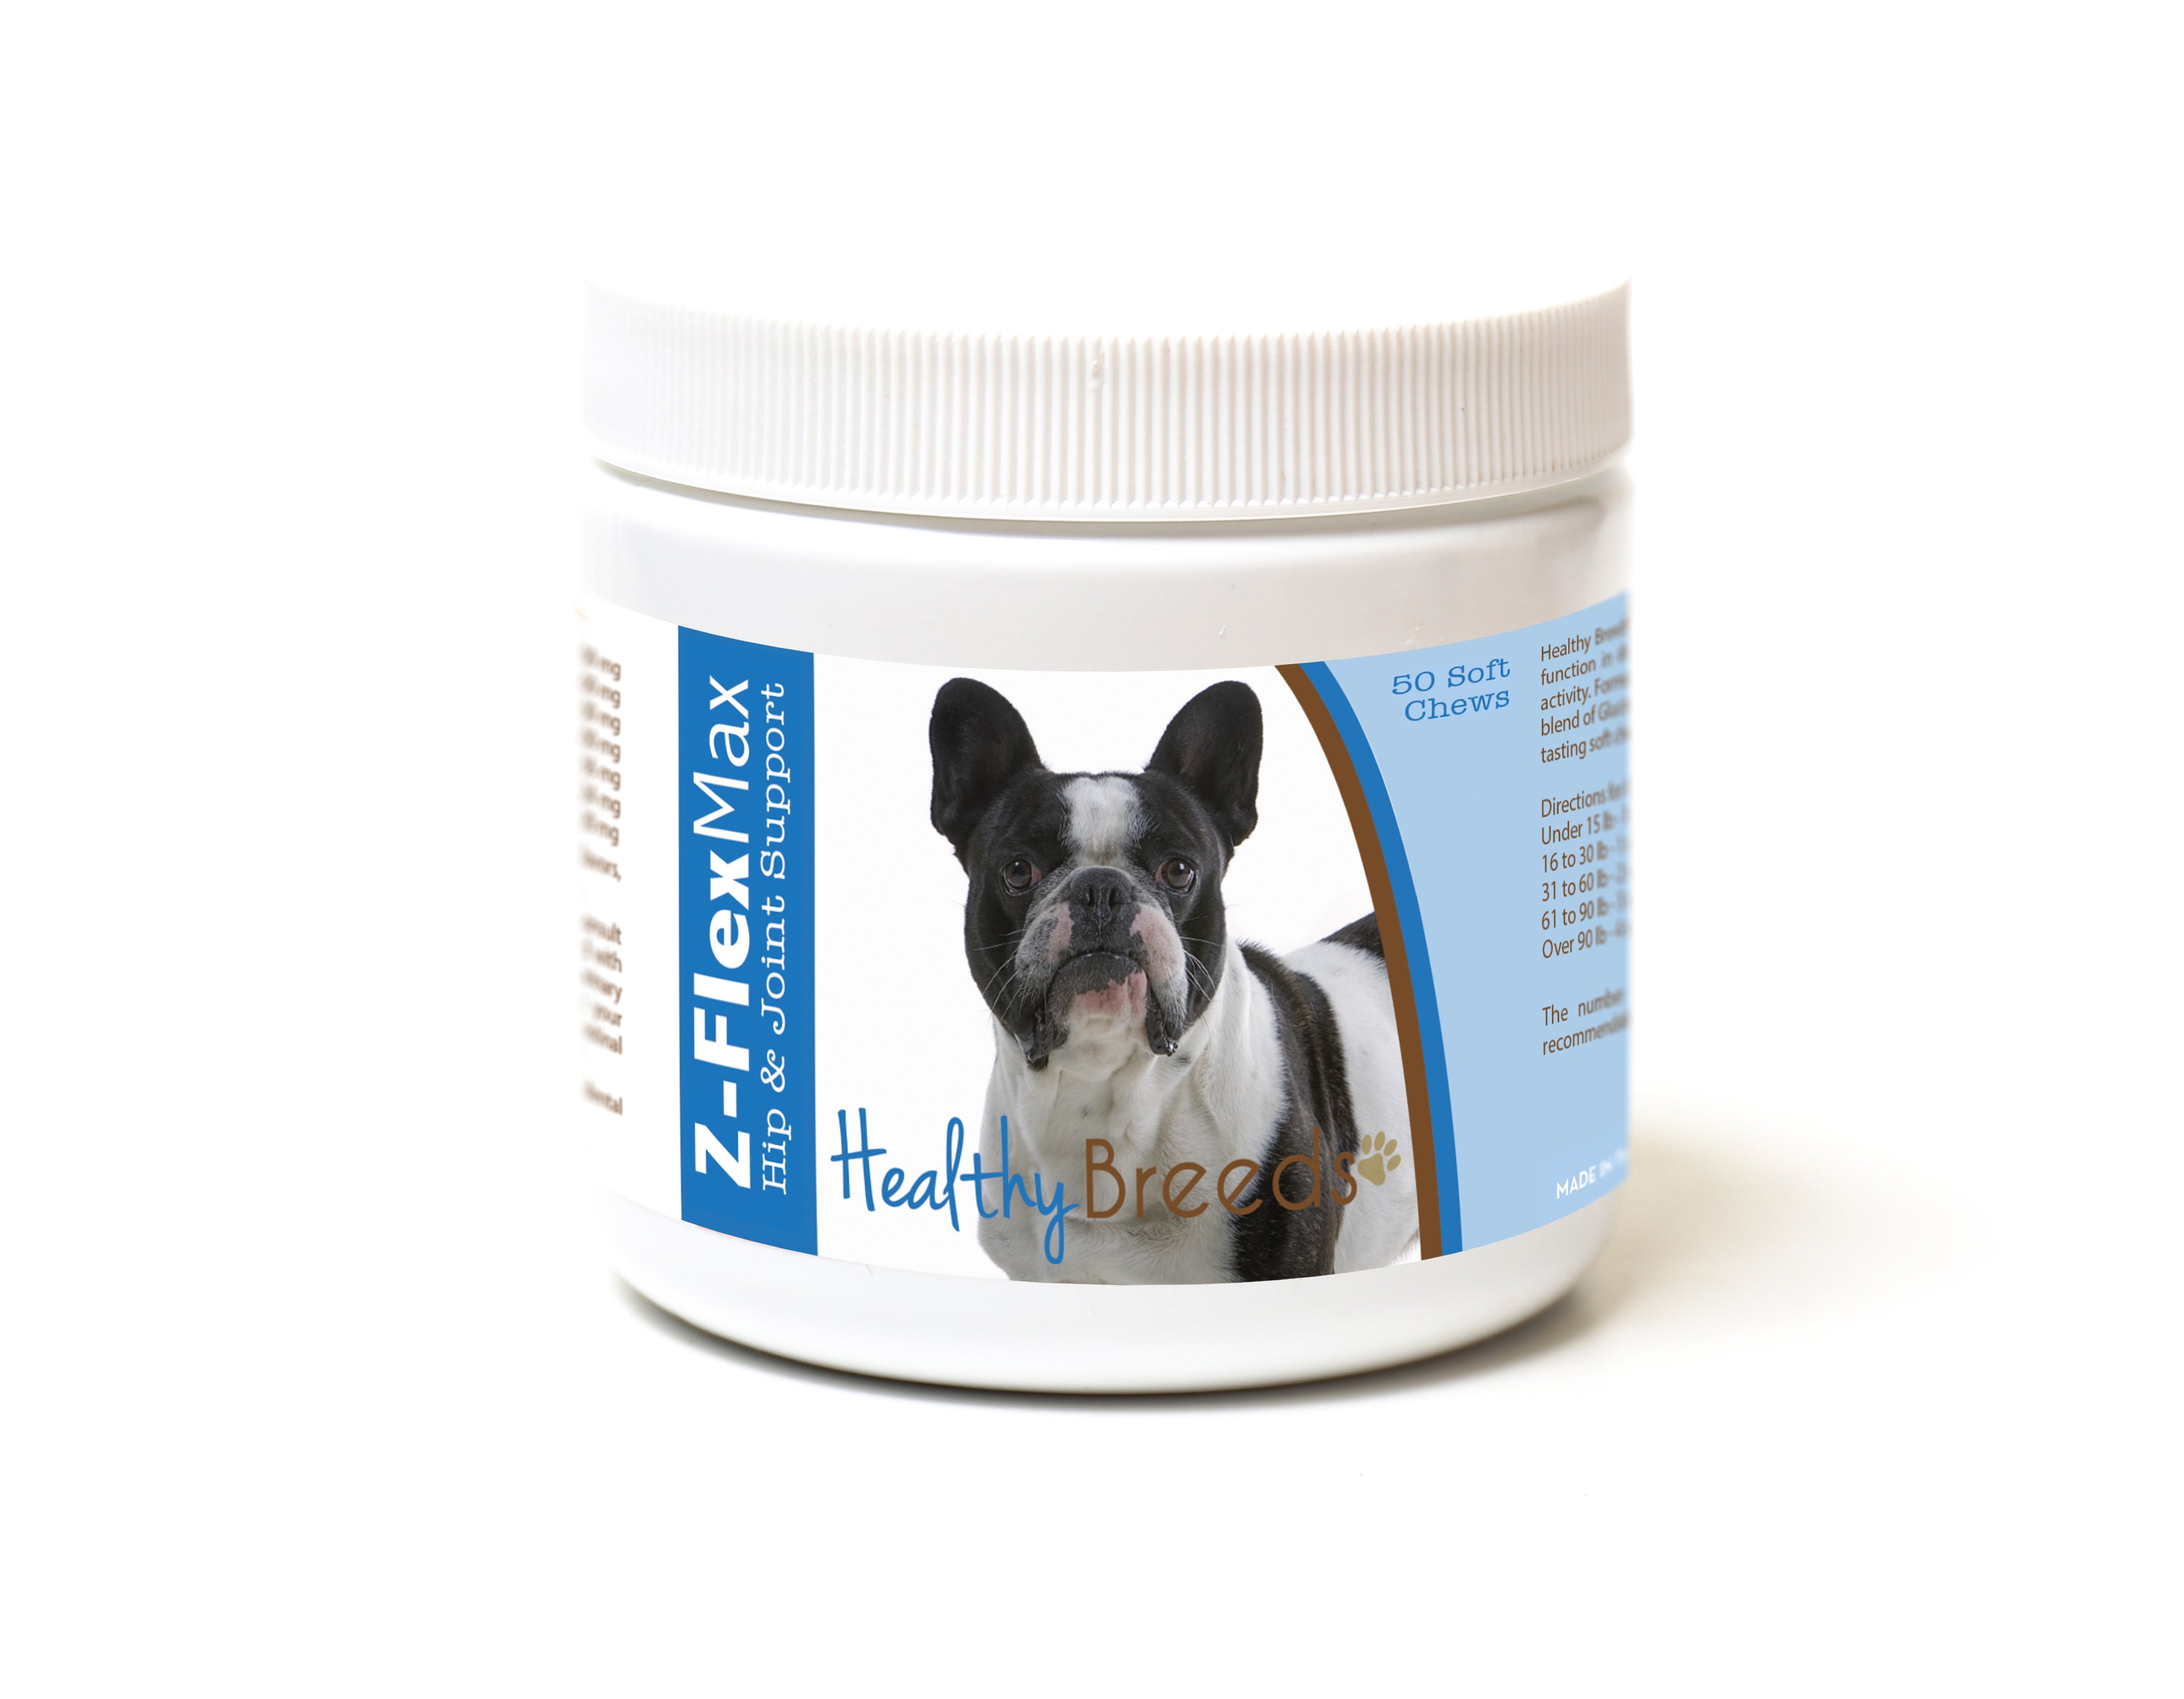 French Bulldog Z-Flex Max Hip and Joint Soft Chews 50 Count